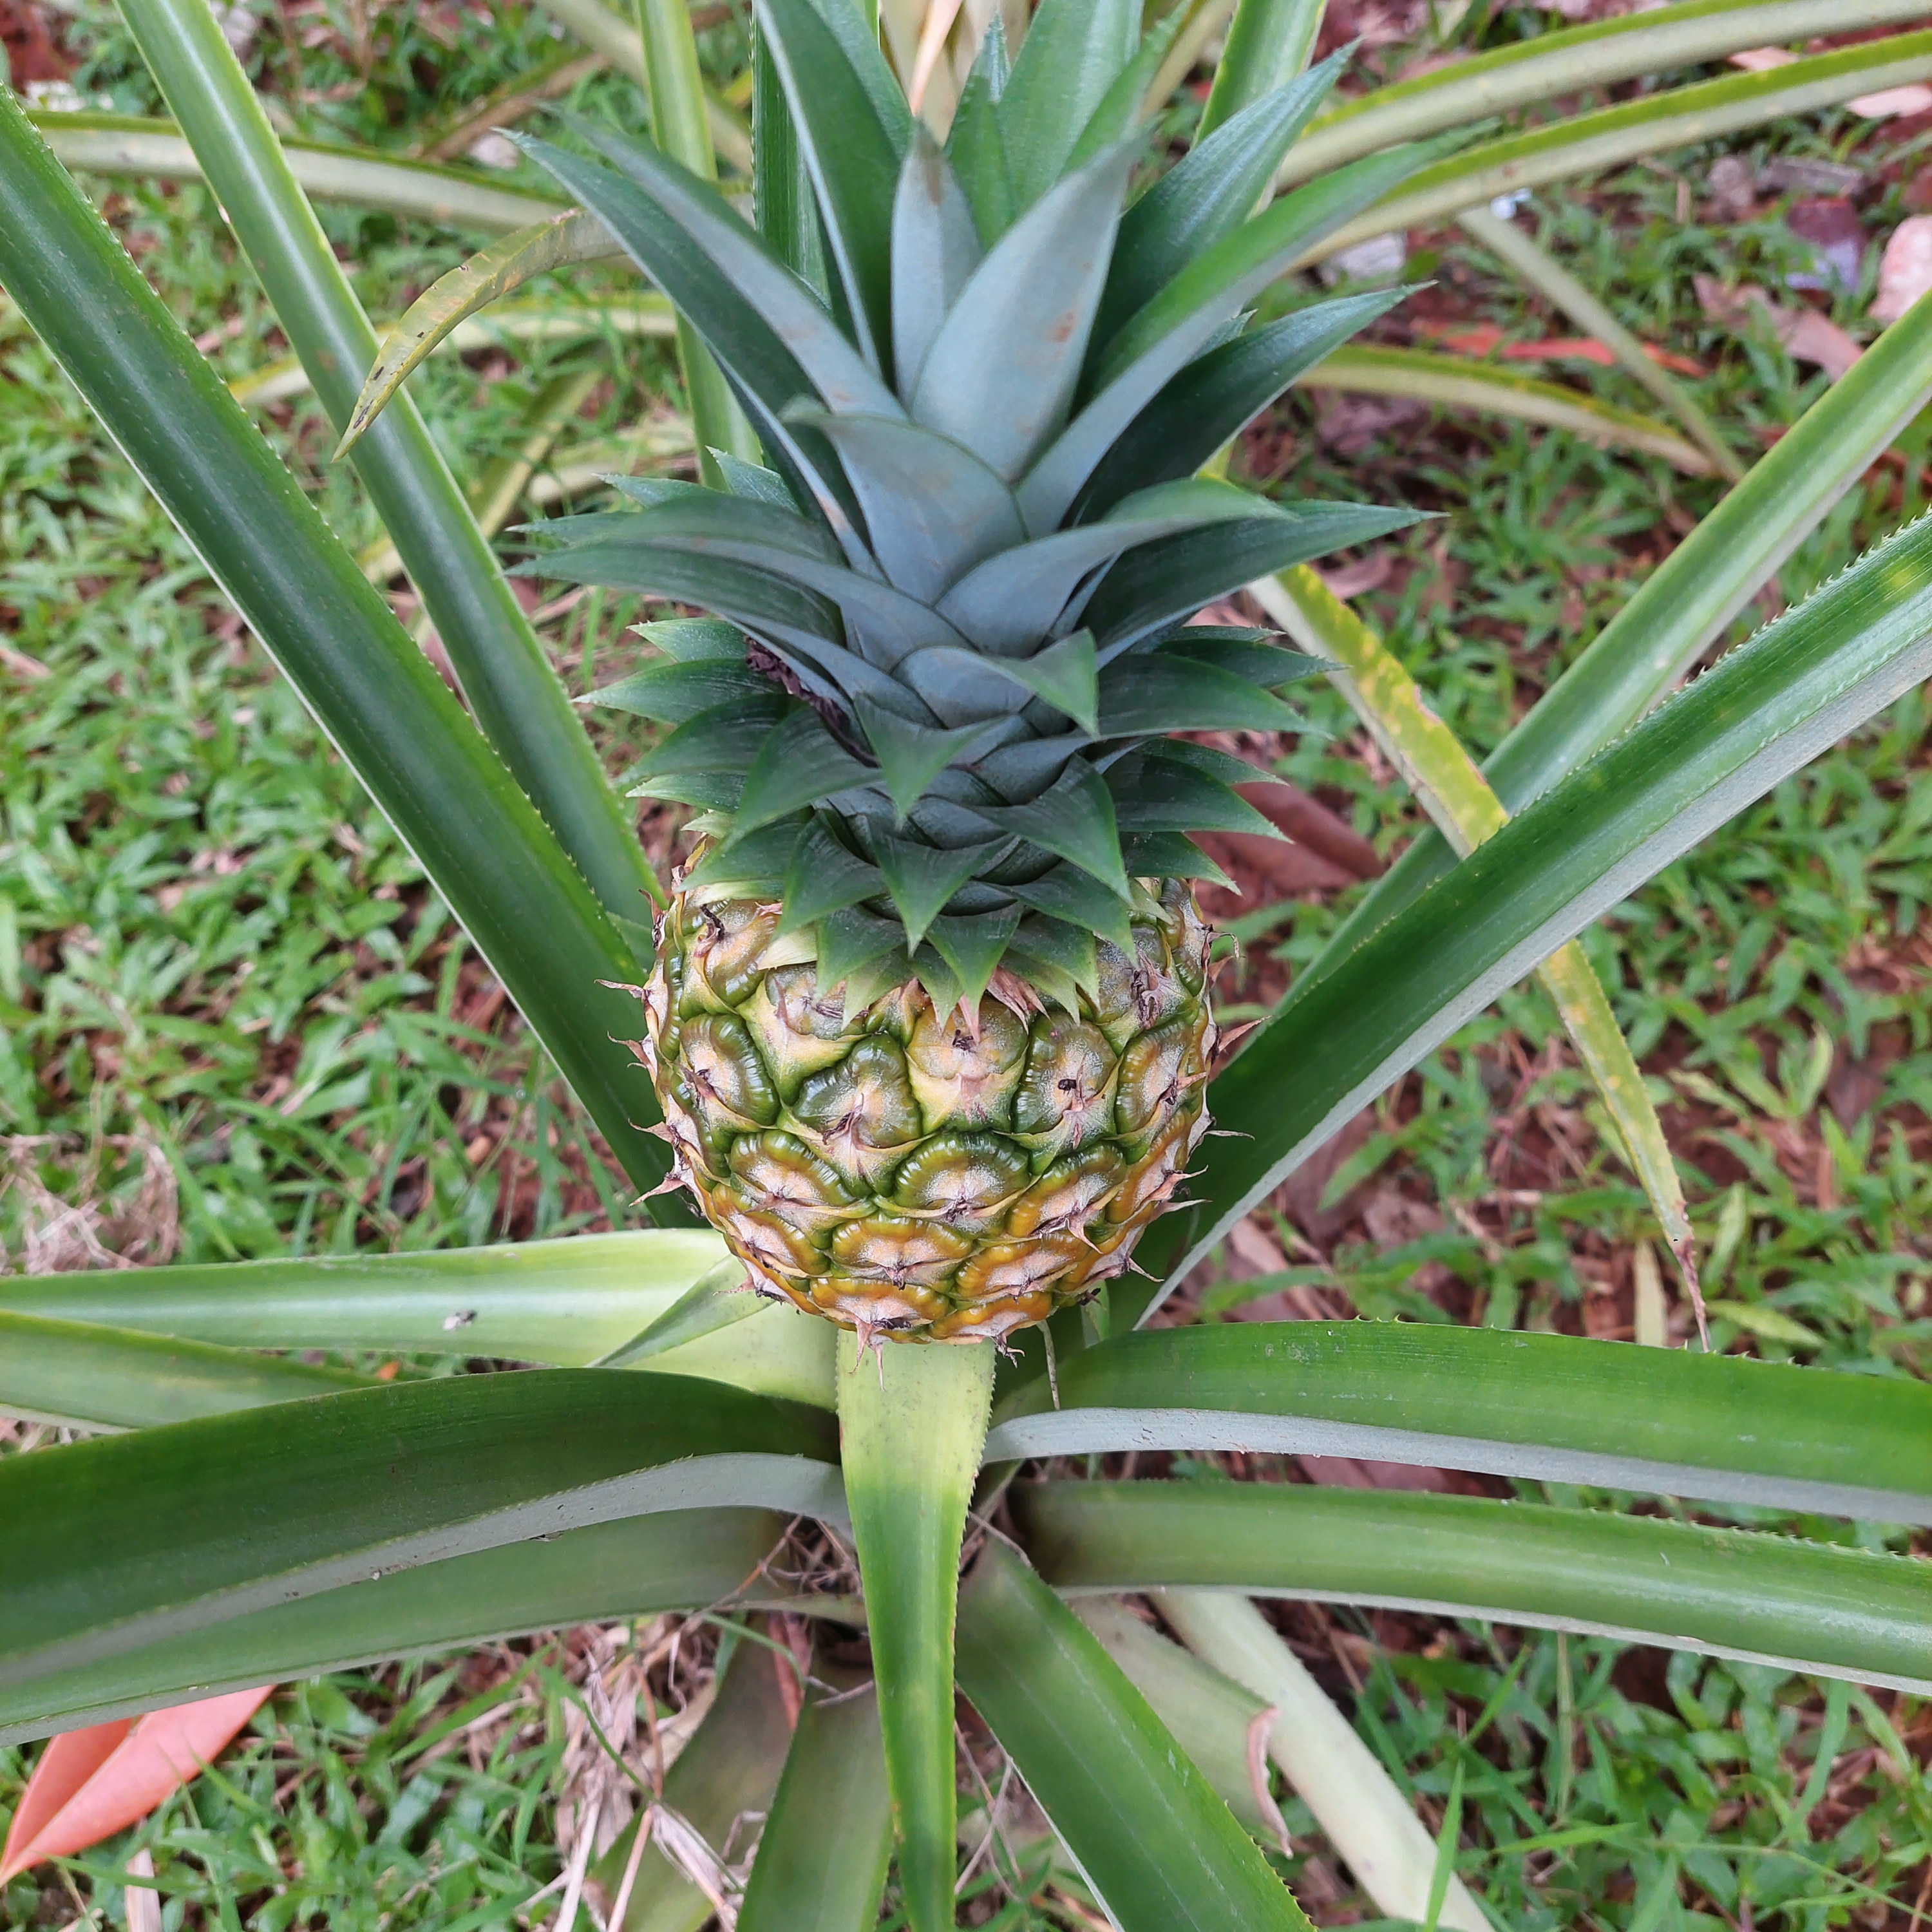 Pineapple plants starting to grow pineapples